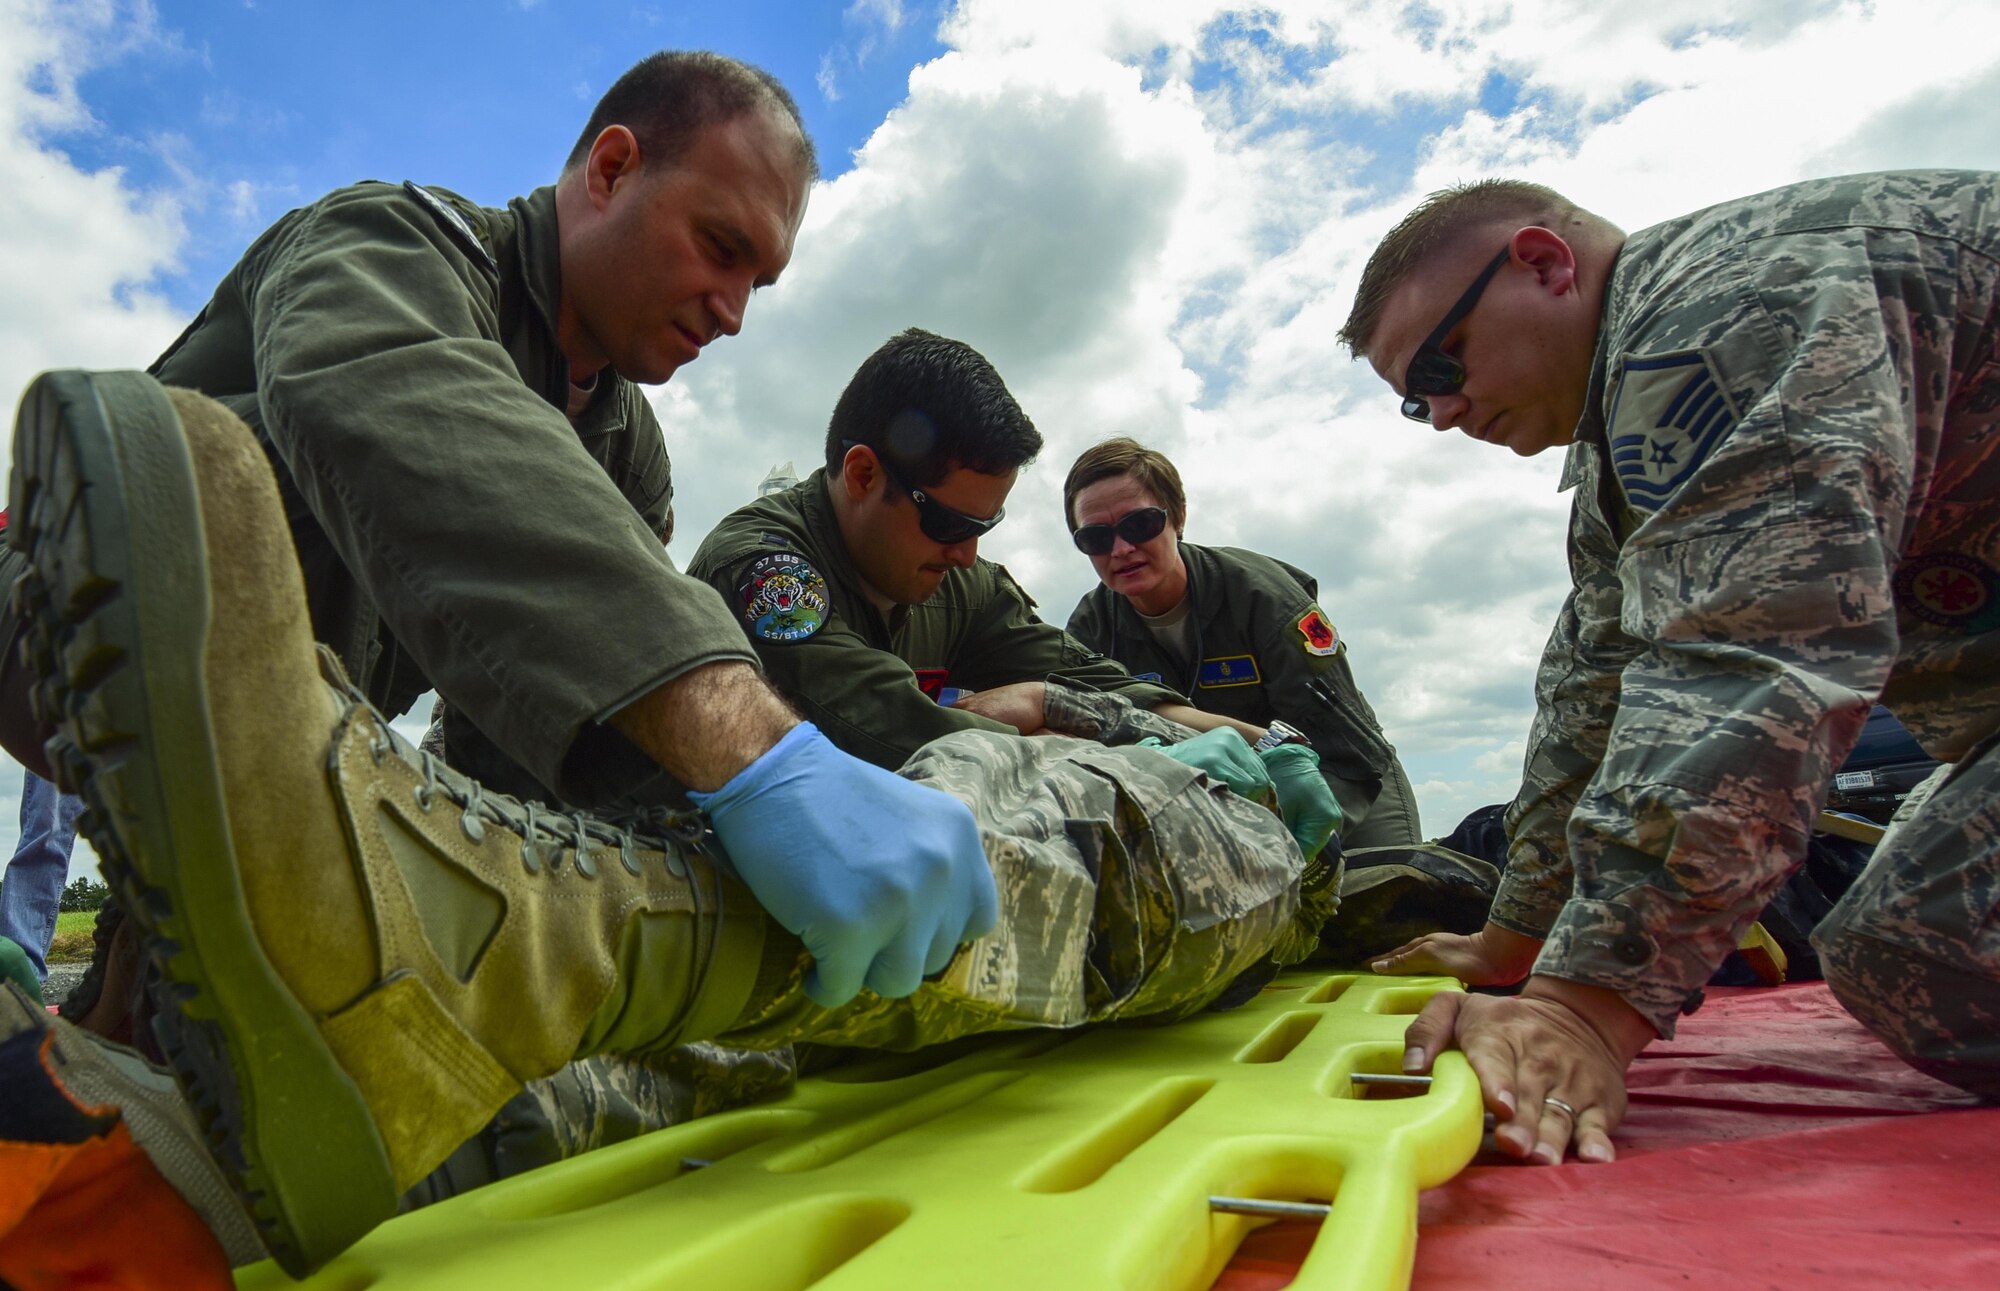 U.S. Air Force medical personnel from the 110th Bomb Squadron and the 37th Expeditionary Bomb Squadron, and firefighters, roll a volunteer onto a gurney during an exercise at Royal Air Force Fairford, U.K., June 13, 2017. Exercises involving multiple departments provide opportunities to increase interoperability and readiness. (U.S. Air Force photo by Airman 1st Class Randahl J. Jenson)